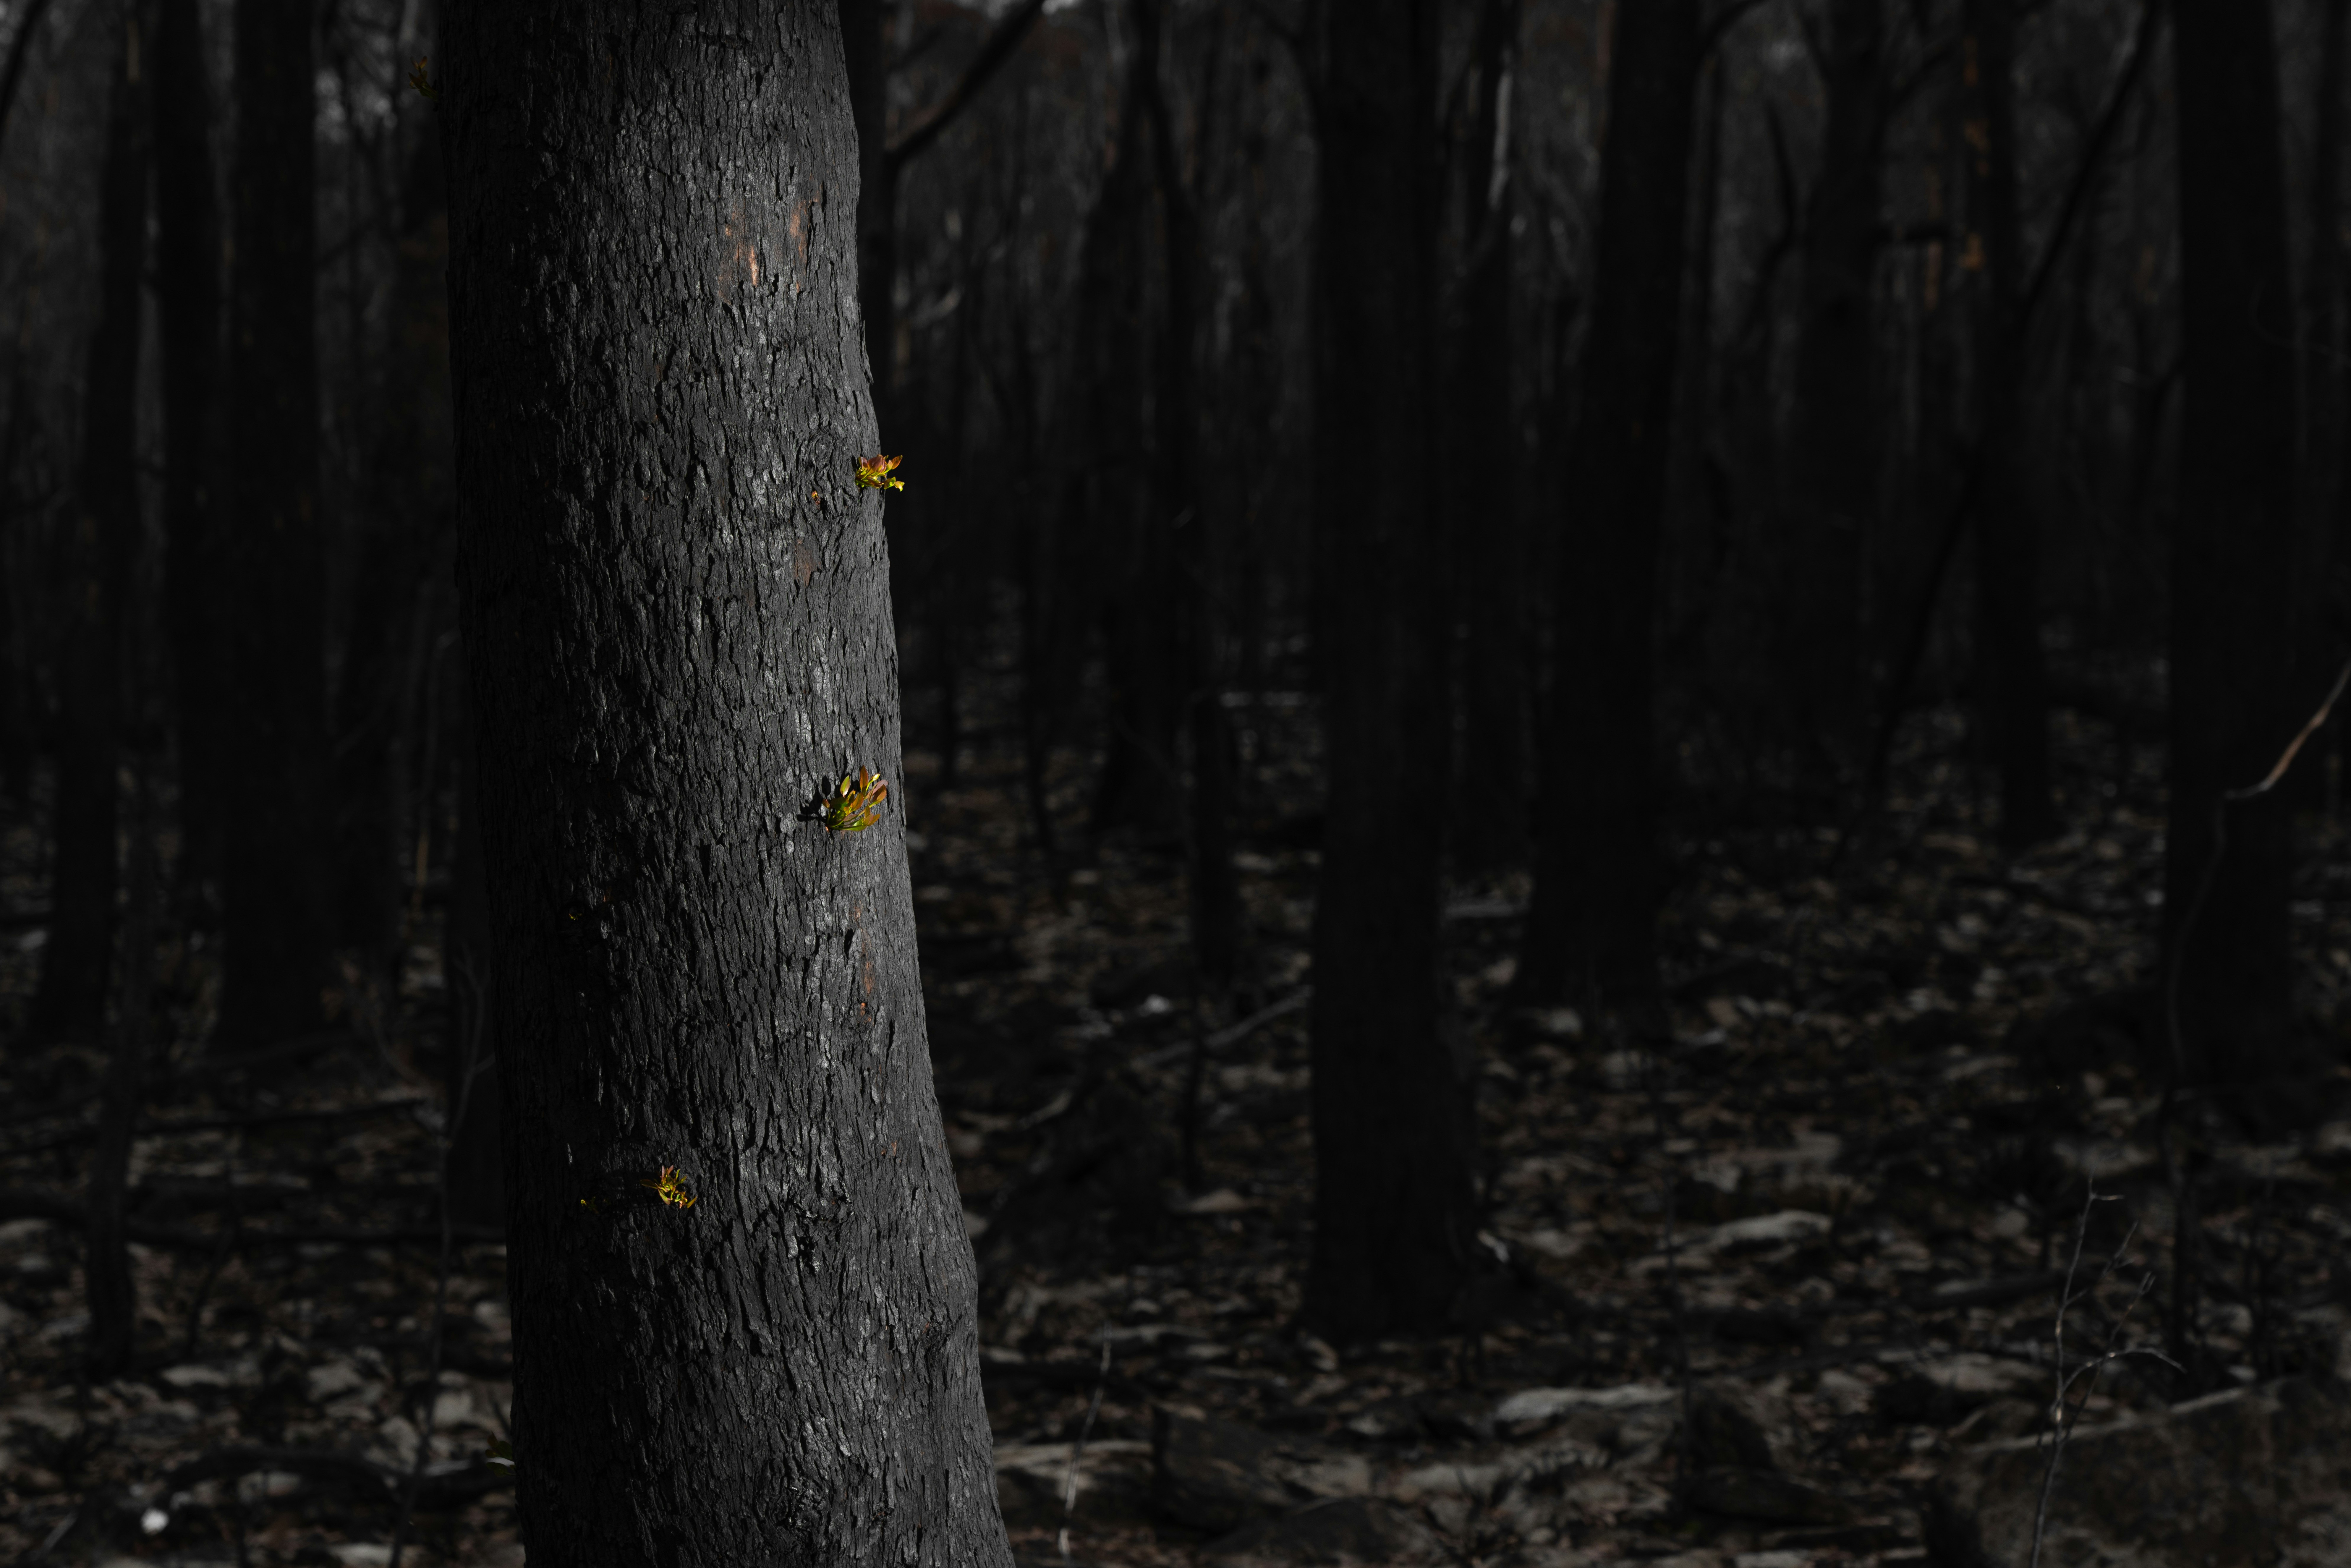 Regrowth in burnt forest sprouting from a burnt eucalypt.